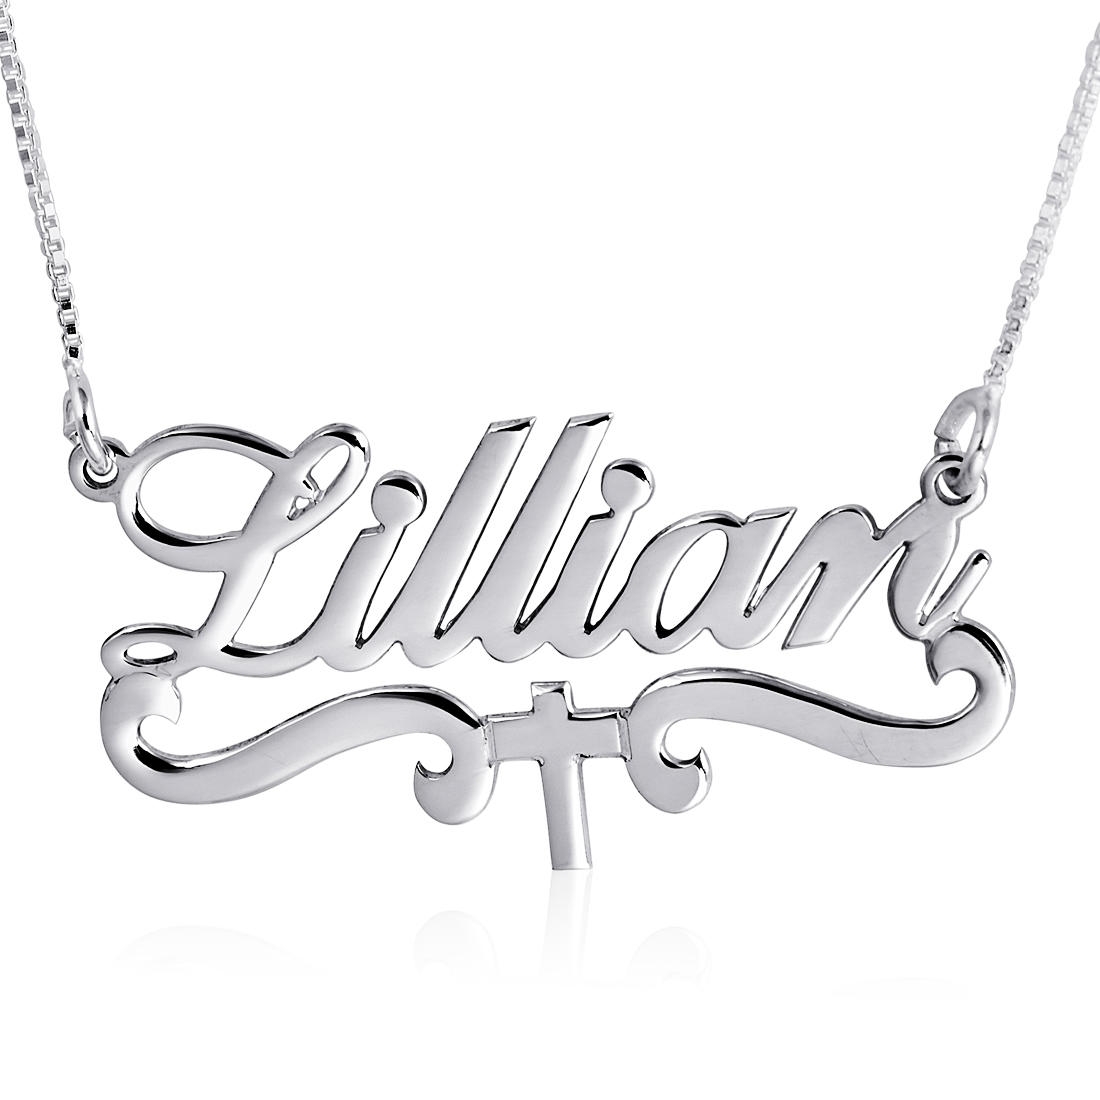 14K White Gold Cross Name Necklace, with Embellishments - 1